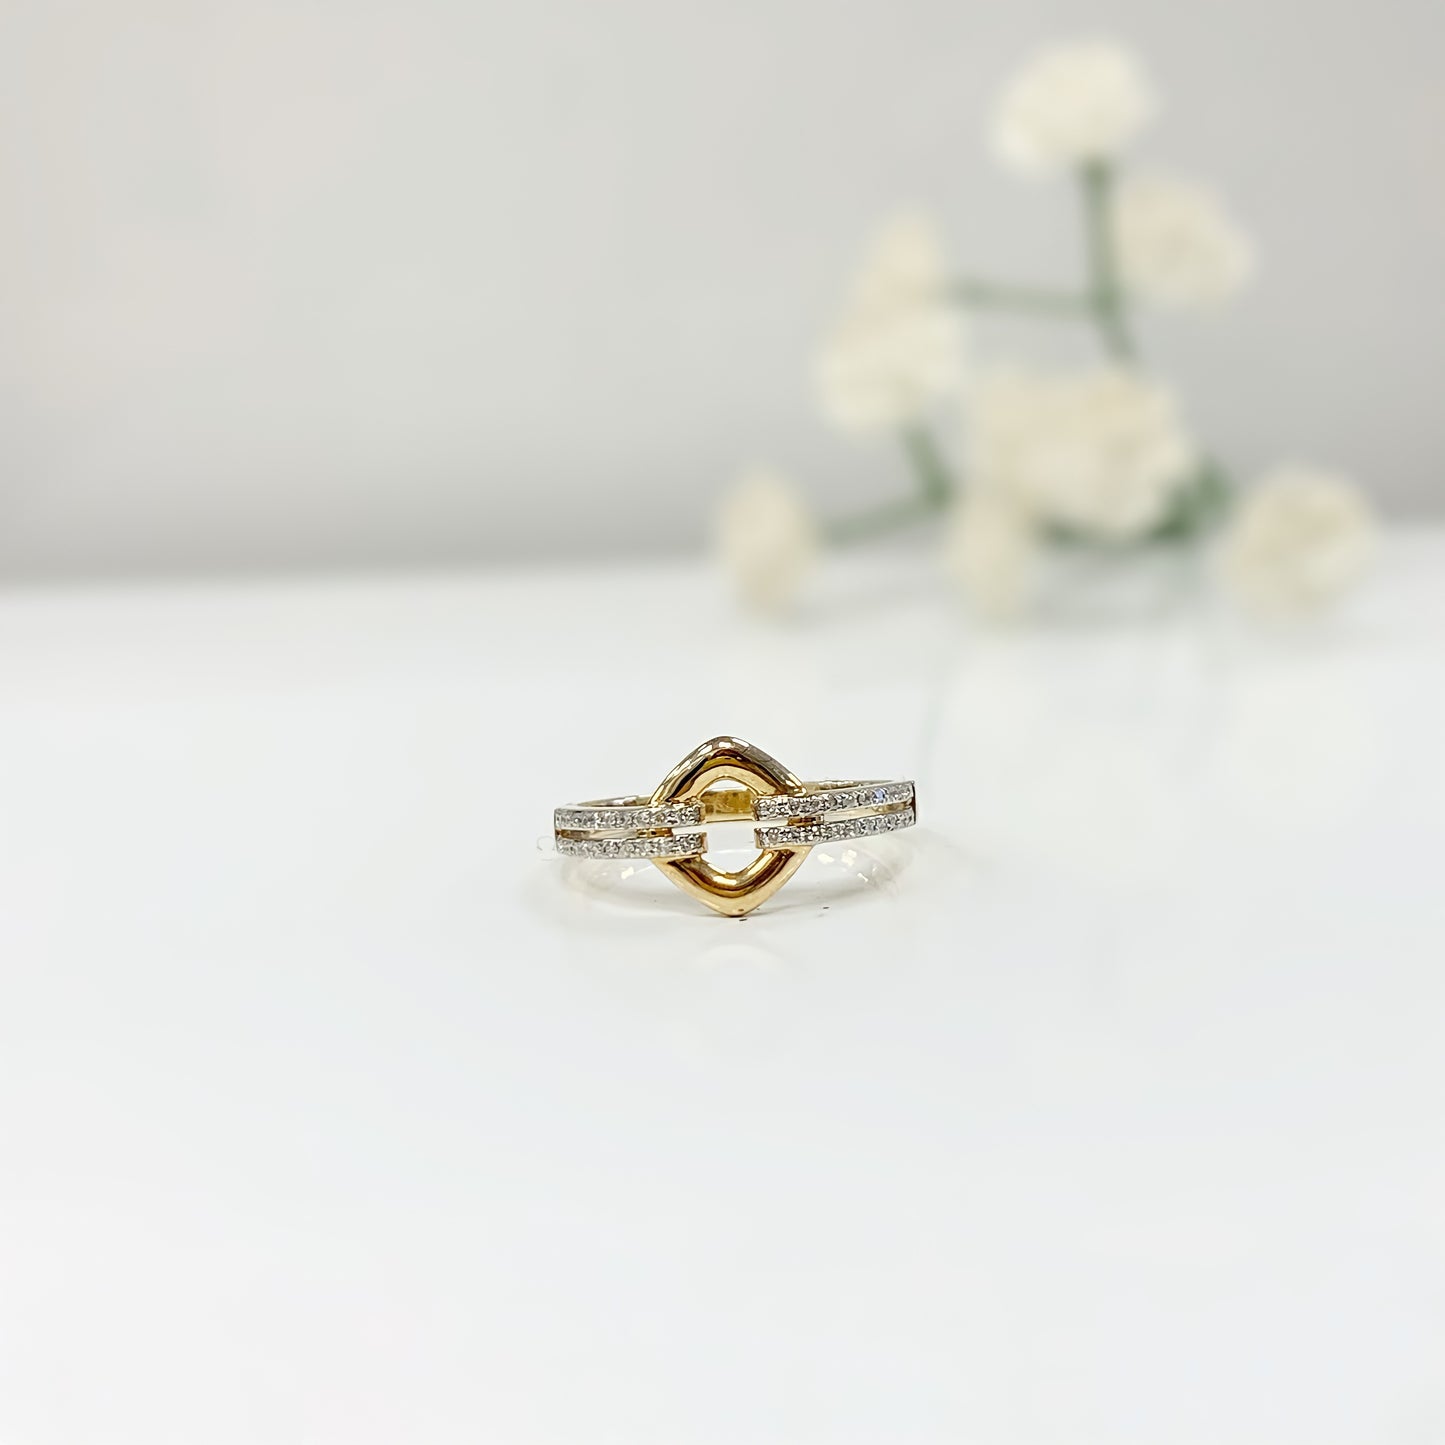 9ct Yellow Gold and Diamond Ring - SIZE N1/2